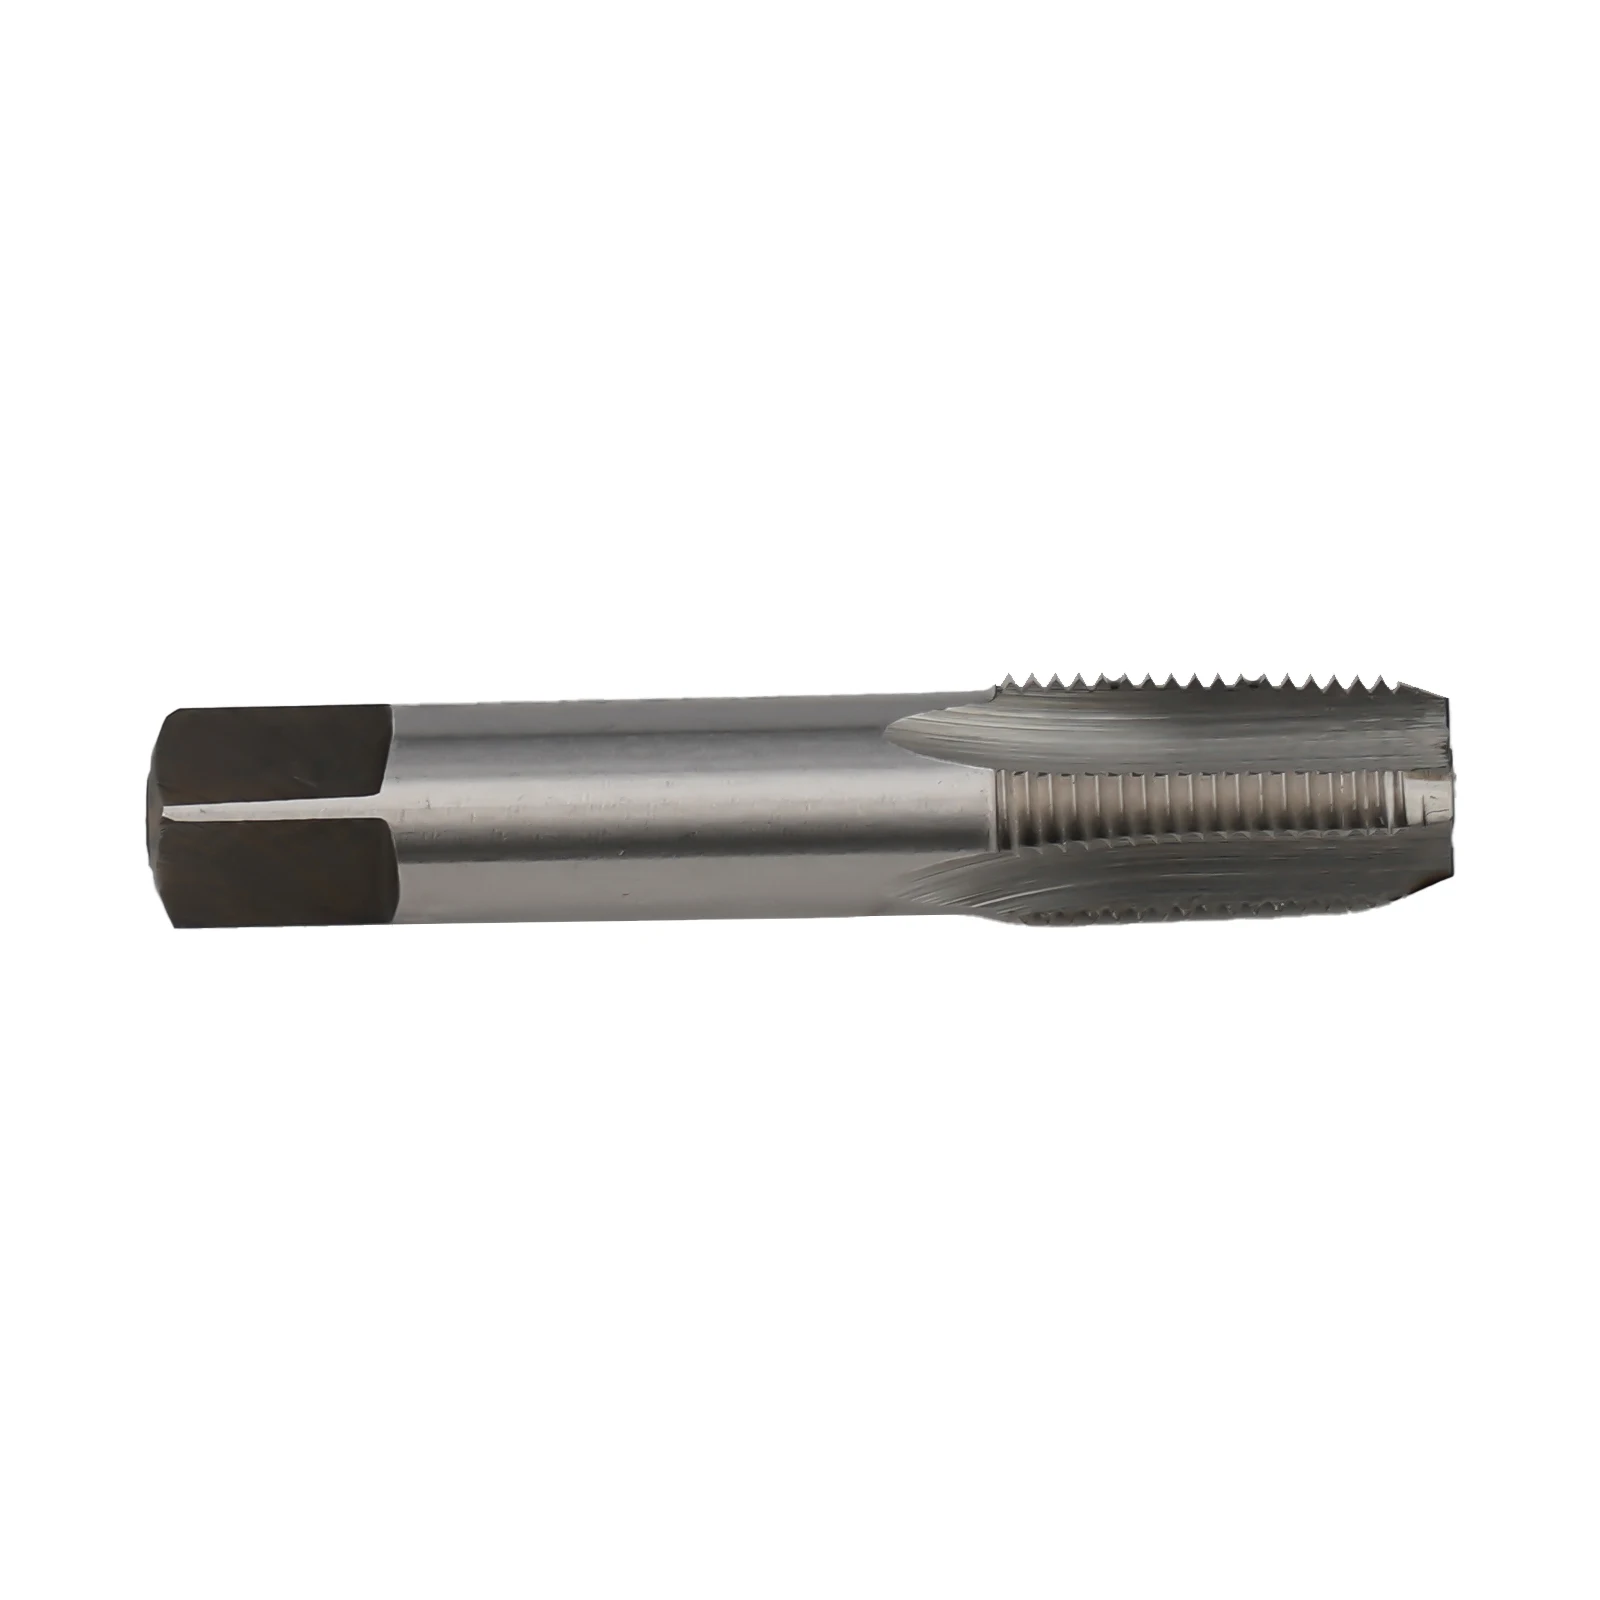 

1/8-27 NPT Taper Pipe Tap High-precision Standard High Speed Steel Thread Tap Repair Tool For Cutting Internal Threads Of Pipes